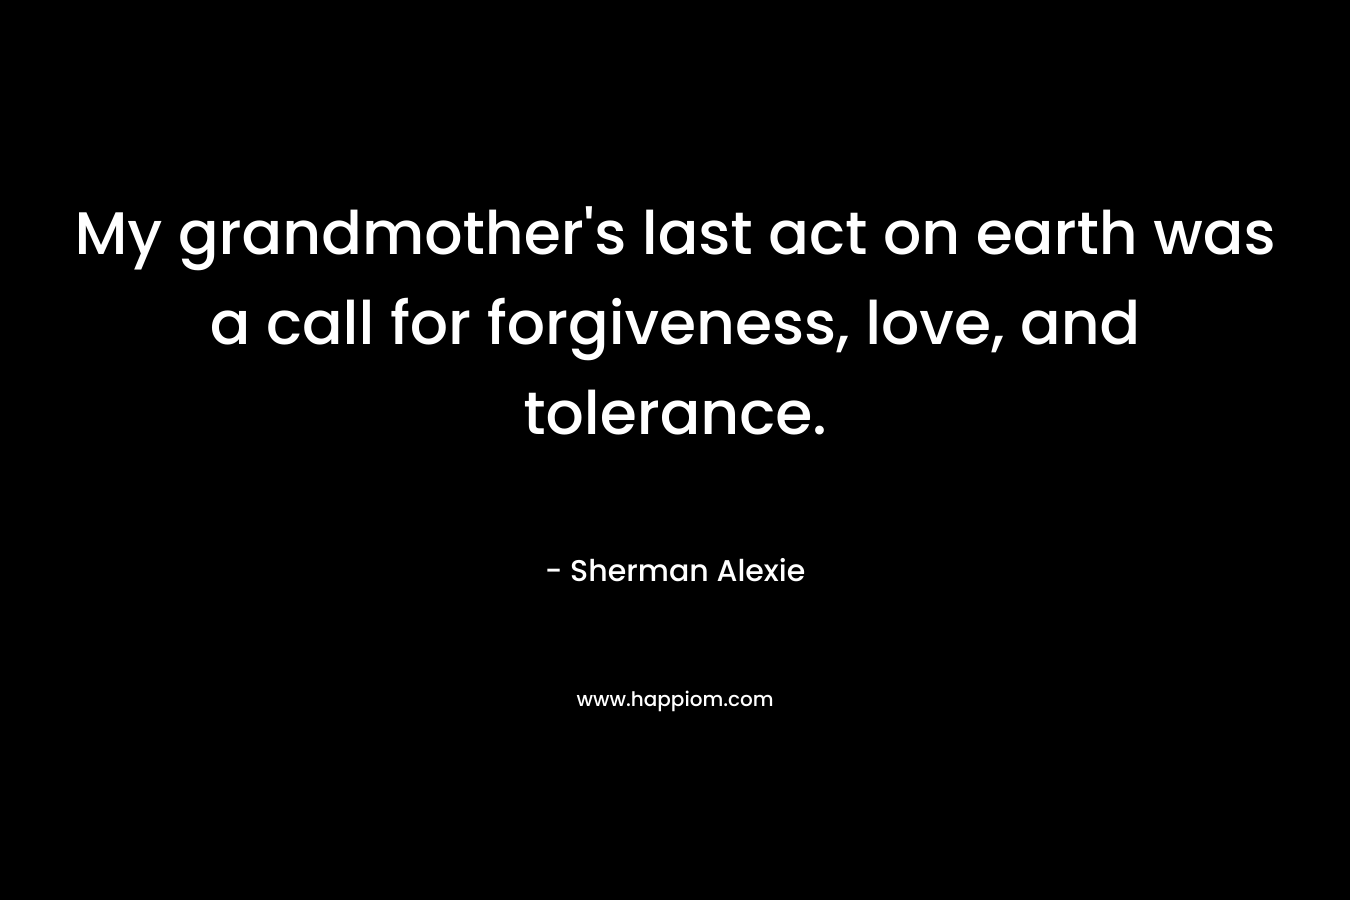 My grandmother's last act on earth was a call for forgiveness, love, and tolerance.